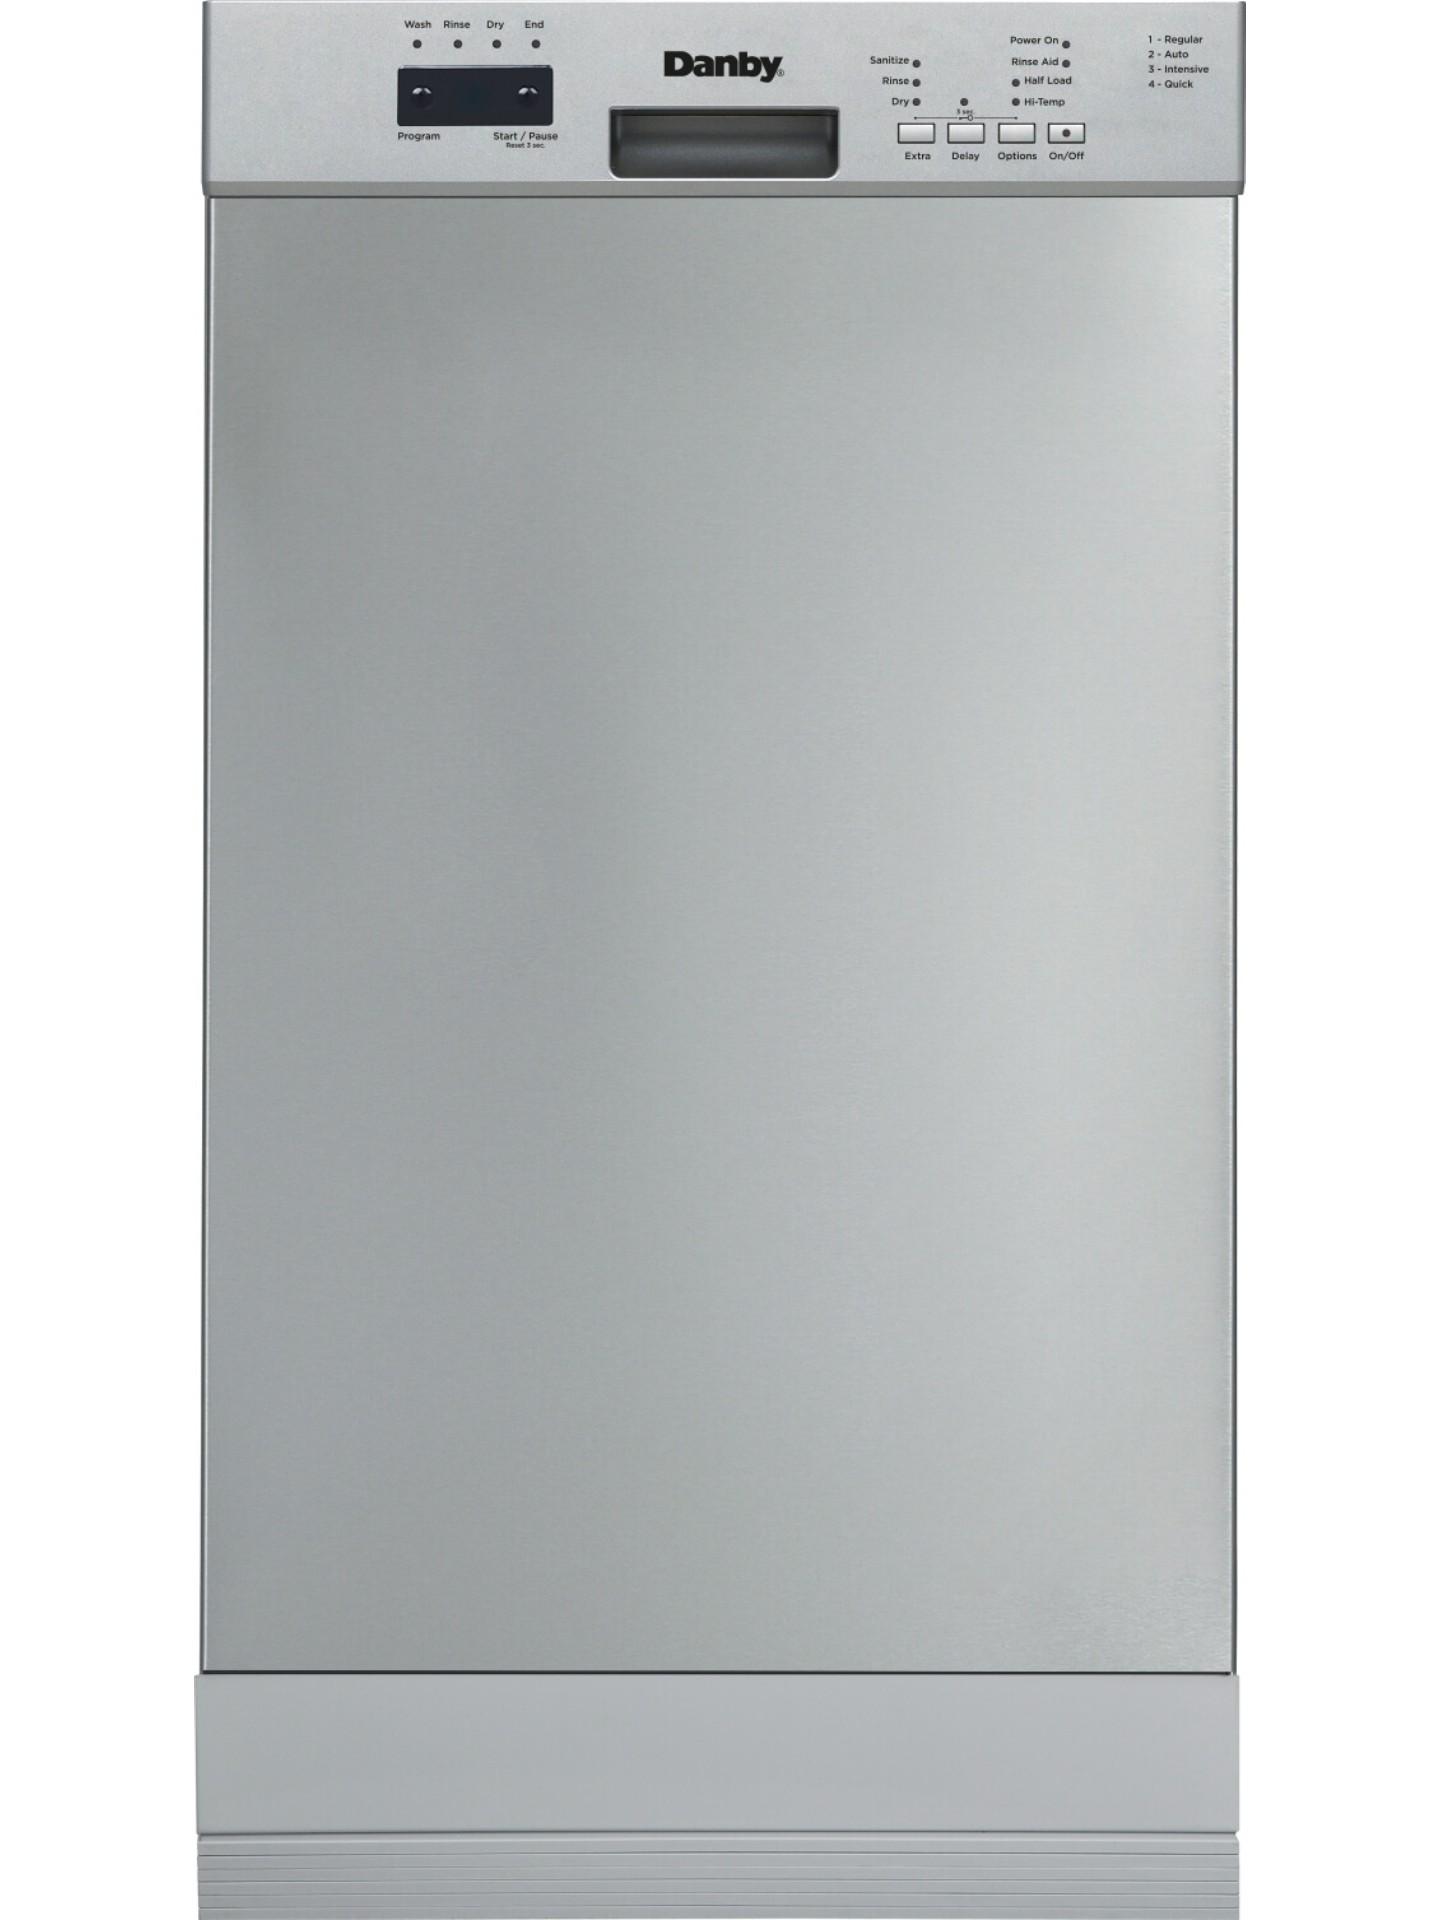 Danby 18" Wide Built-in Dishwasher in Stainless Steel